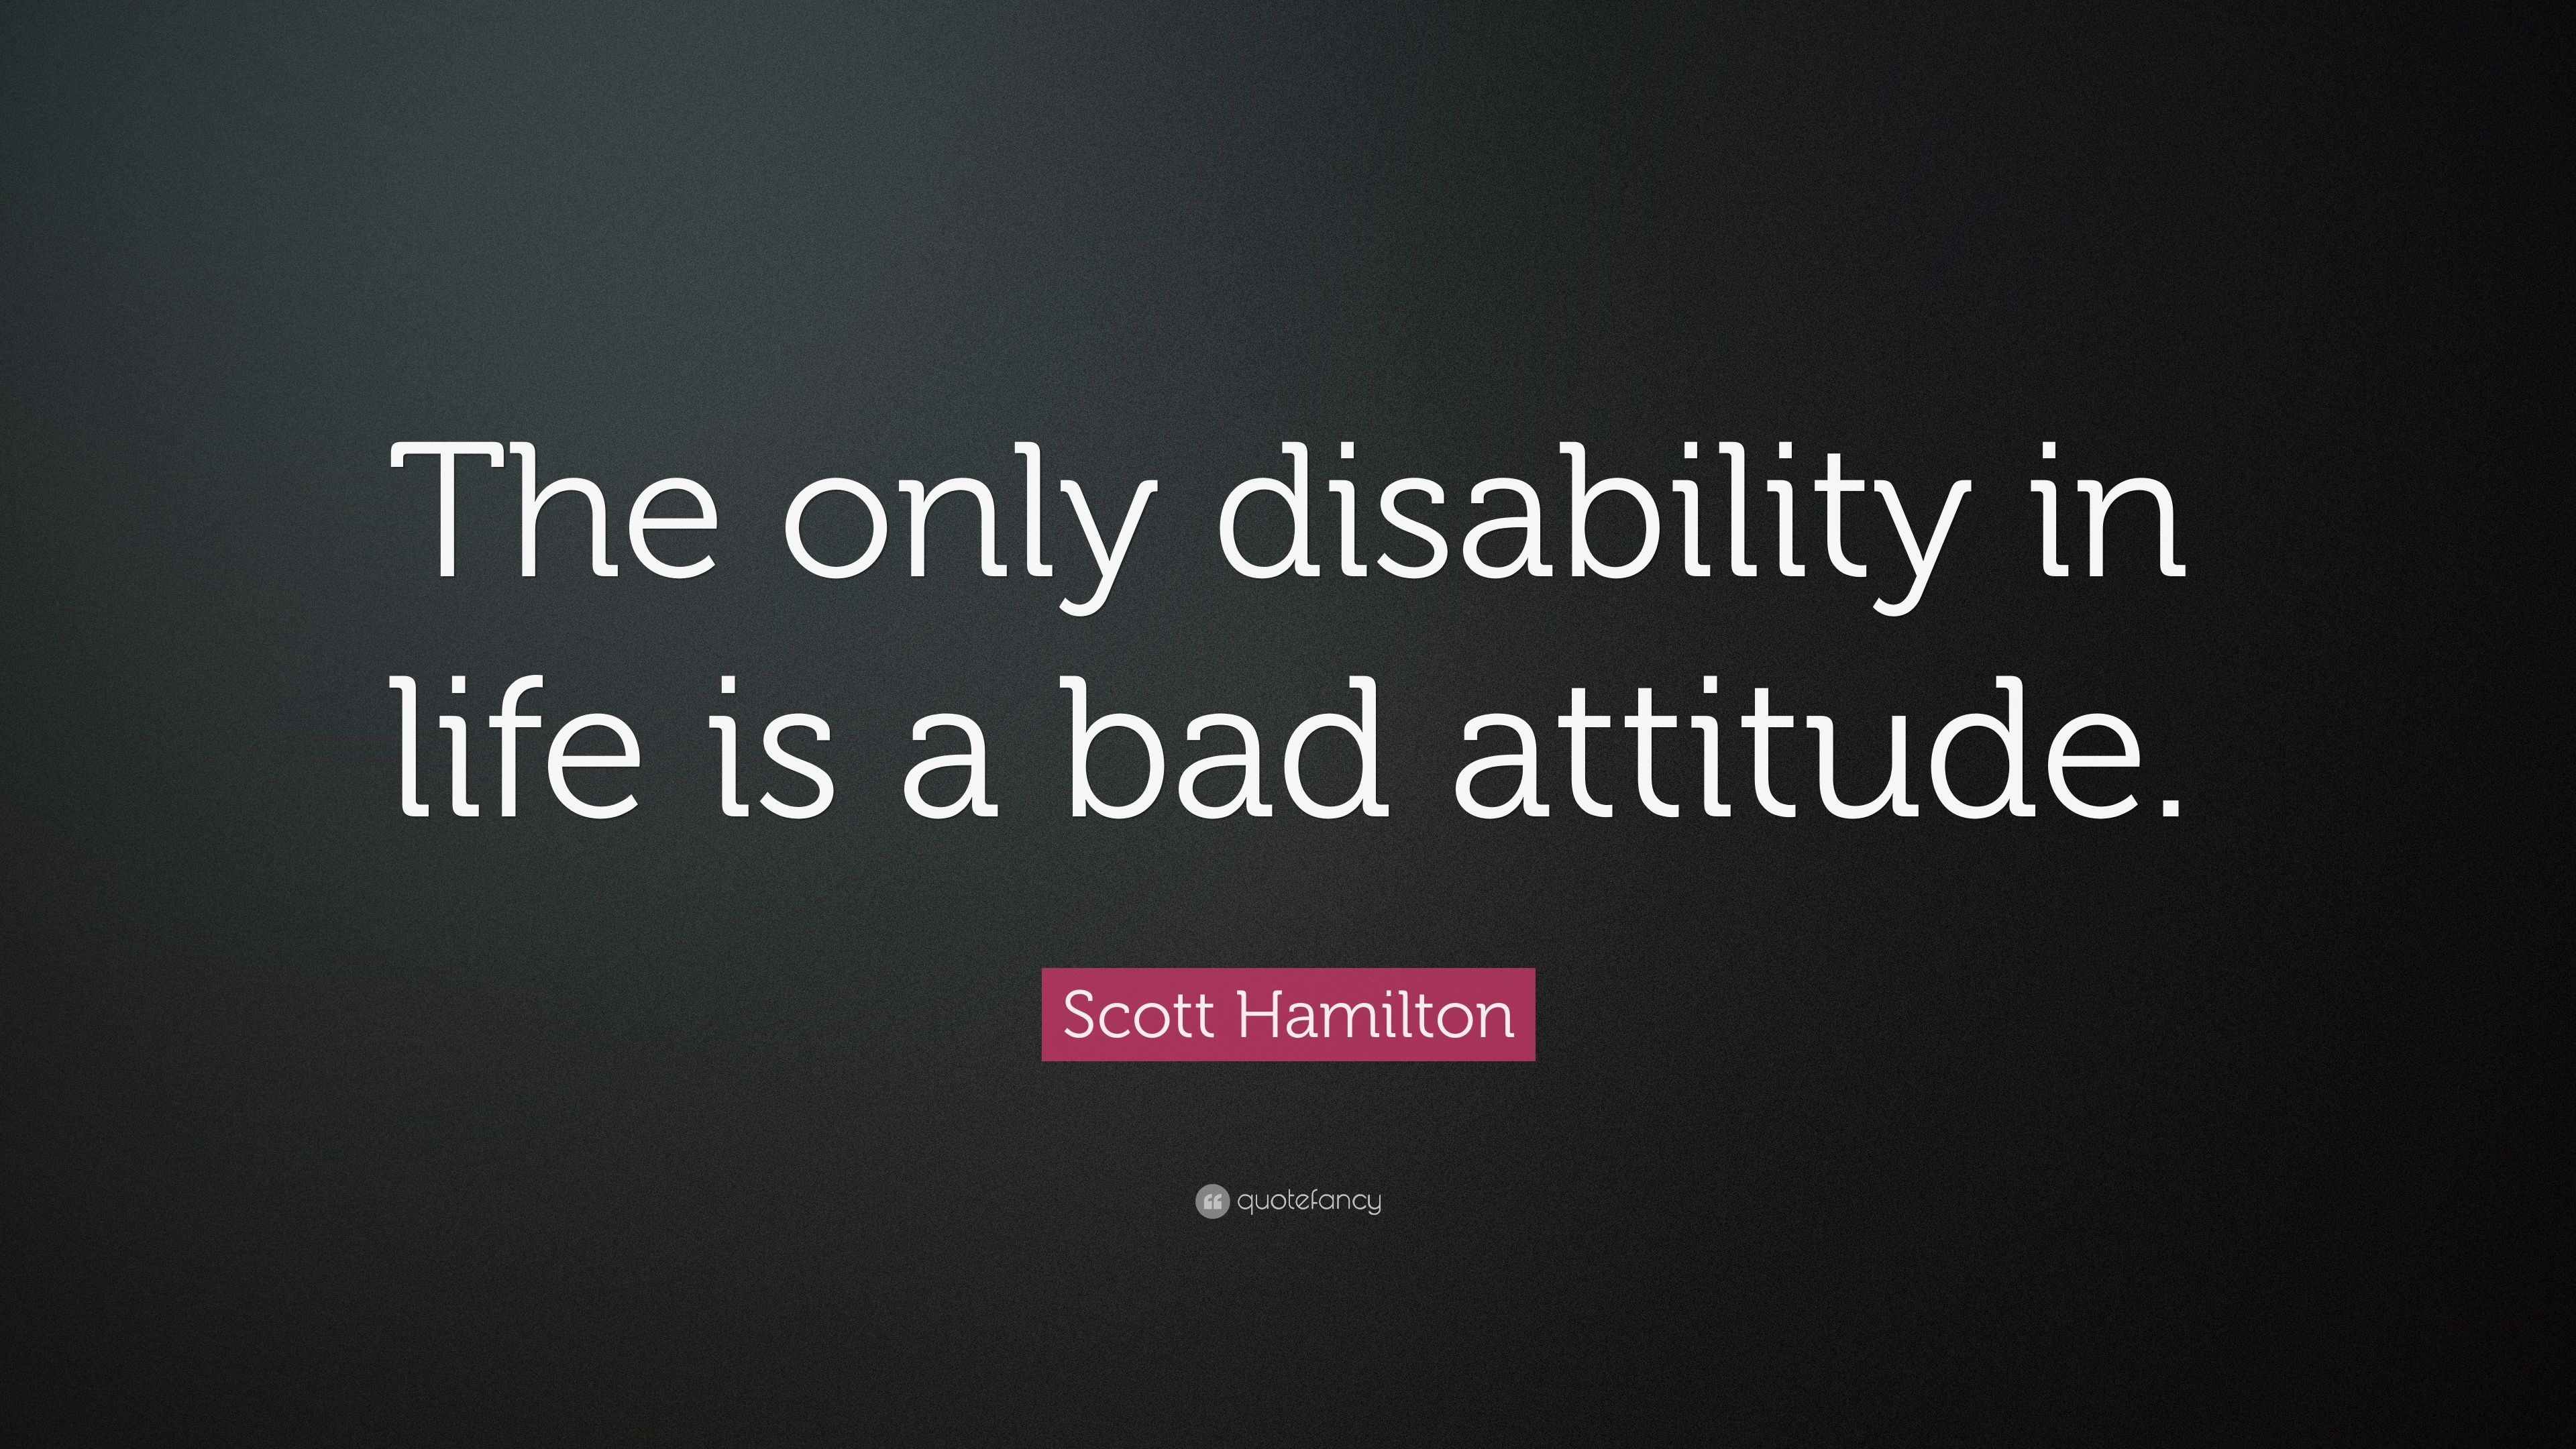 Scott Hamilton Quote: “The only disability in life is a bad attitude.” (24 wallpaper)